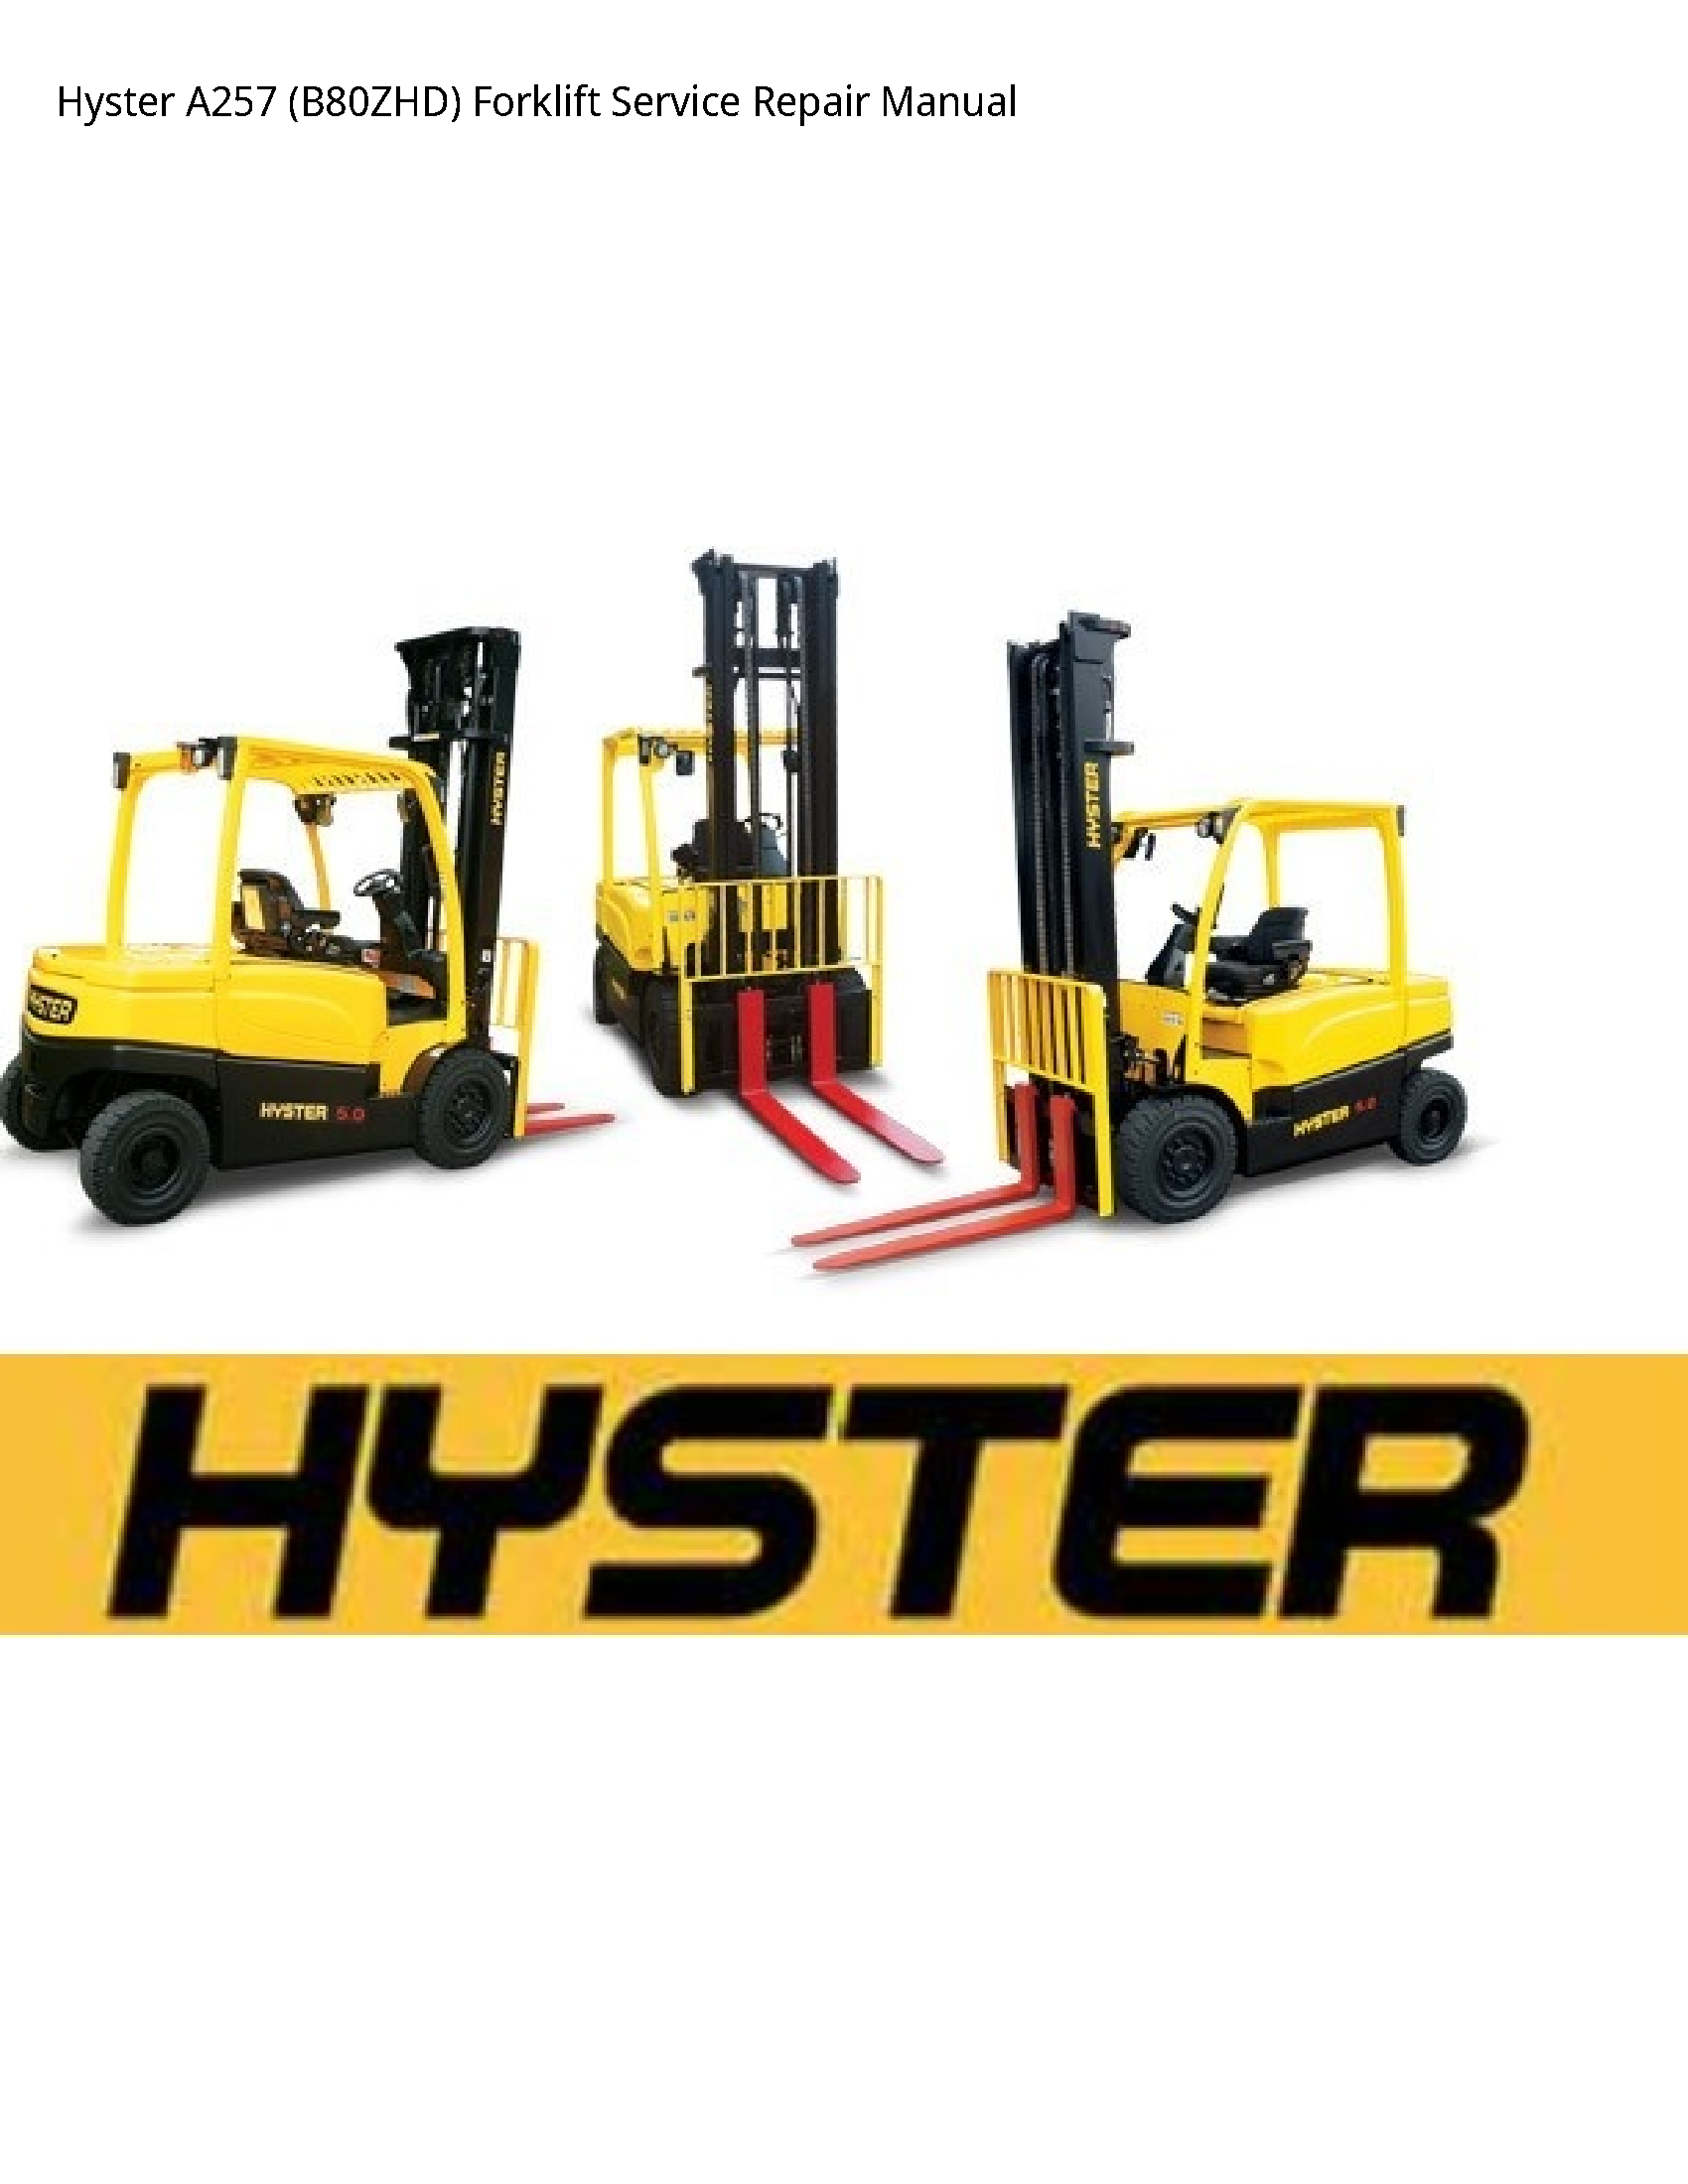 Hyster A257 Forklift manual